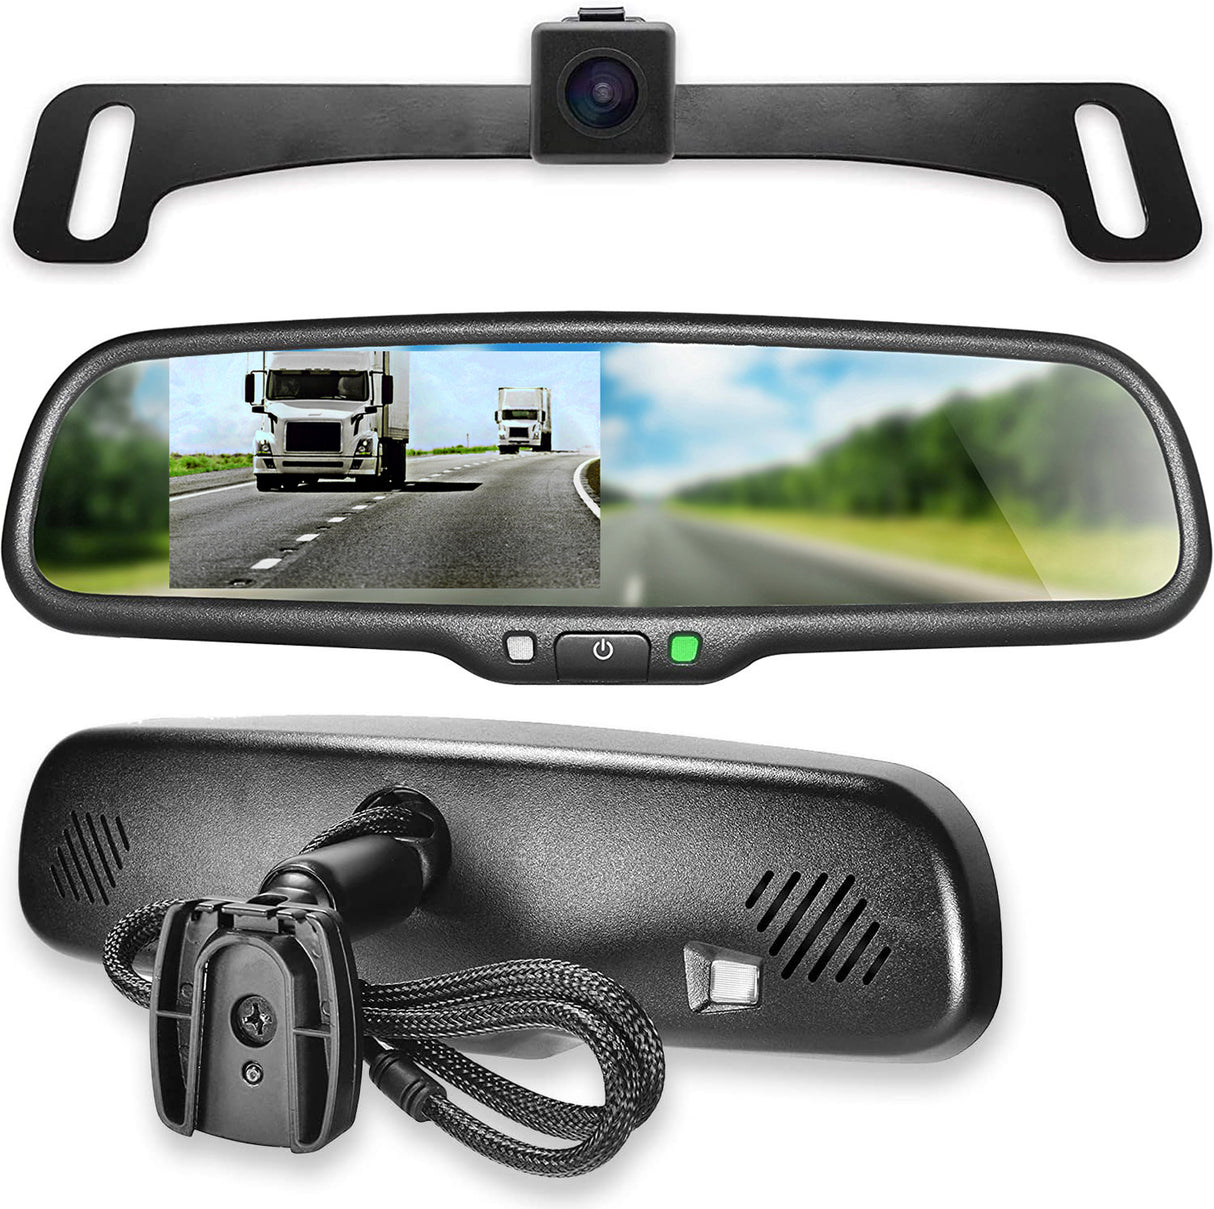 Master Tailgaters 10.5" OEM Rear View Mirror with 4.3" LCD Screen and 170° Backup Camera | Rearview Universal Fit | Auto Adjusting Brightness LCD | Anti Glare | Full Original Mirror Replacement